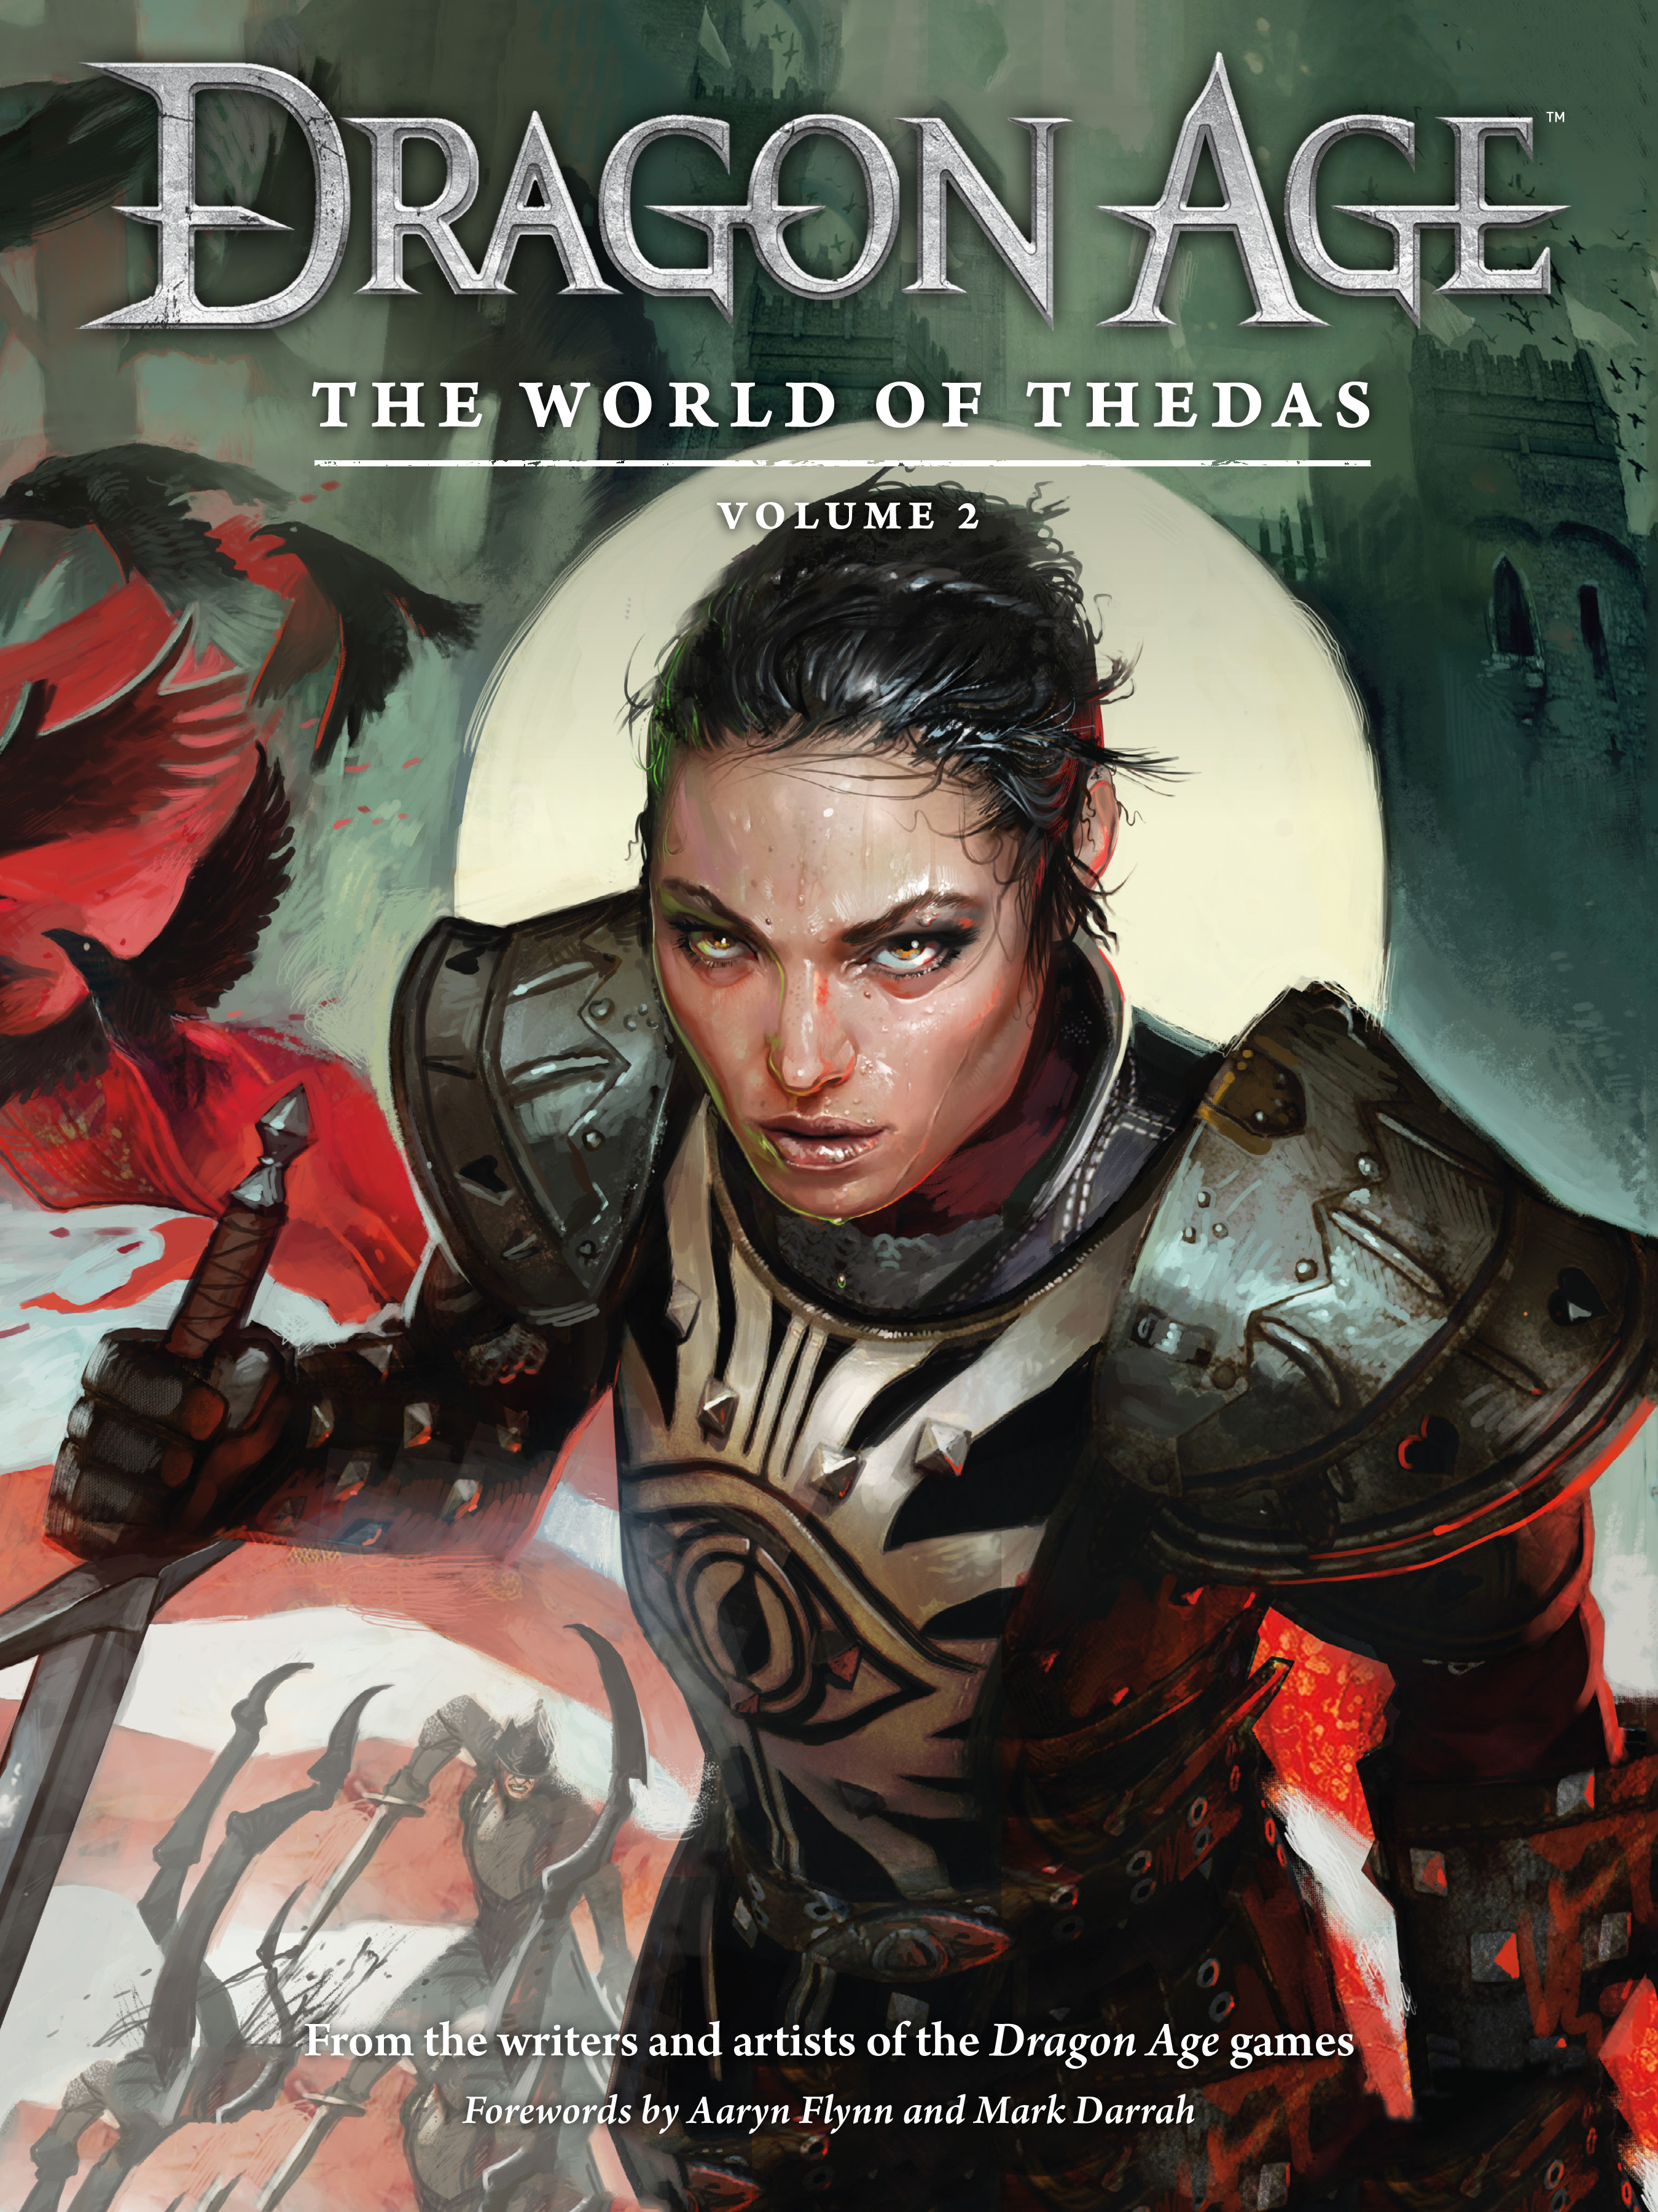 Read online Dragon Age: The World of Thedas comic -  Issue # TPB 2 - 1